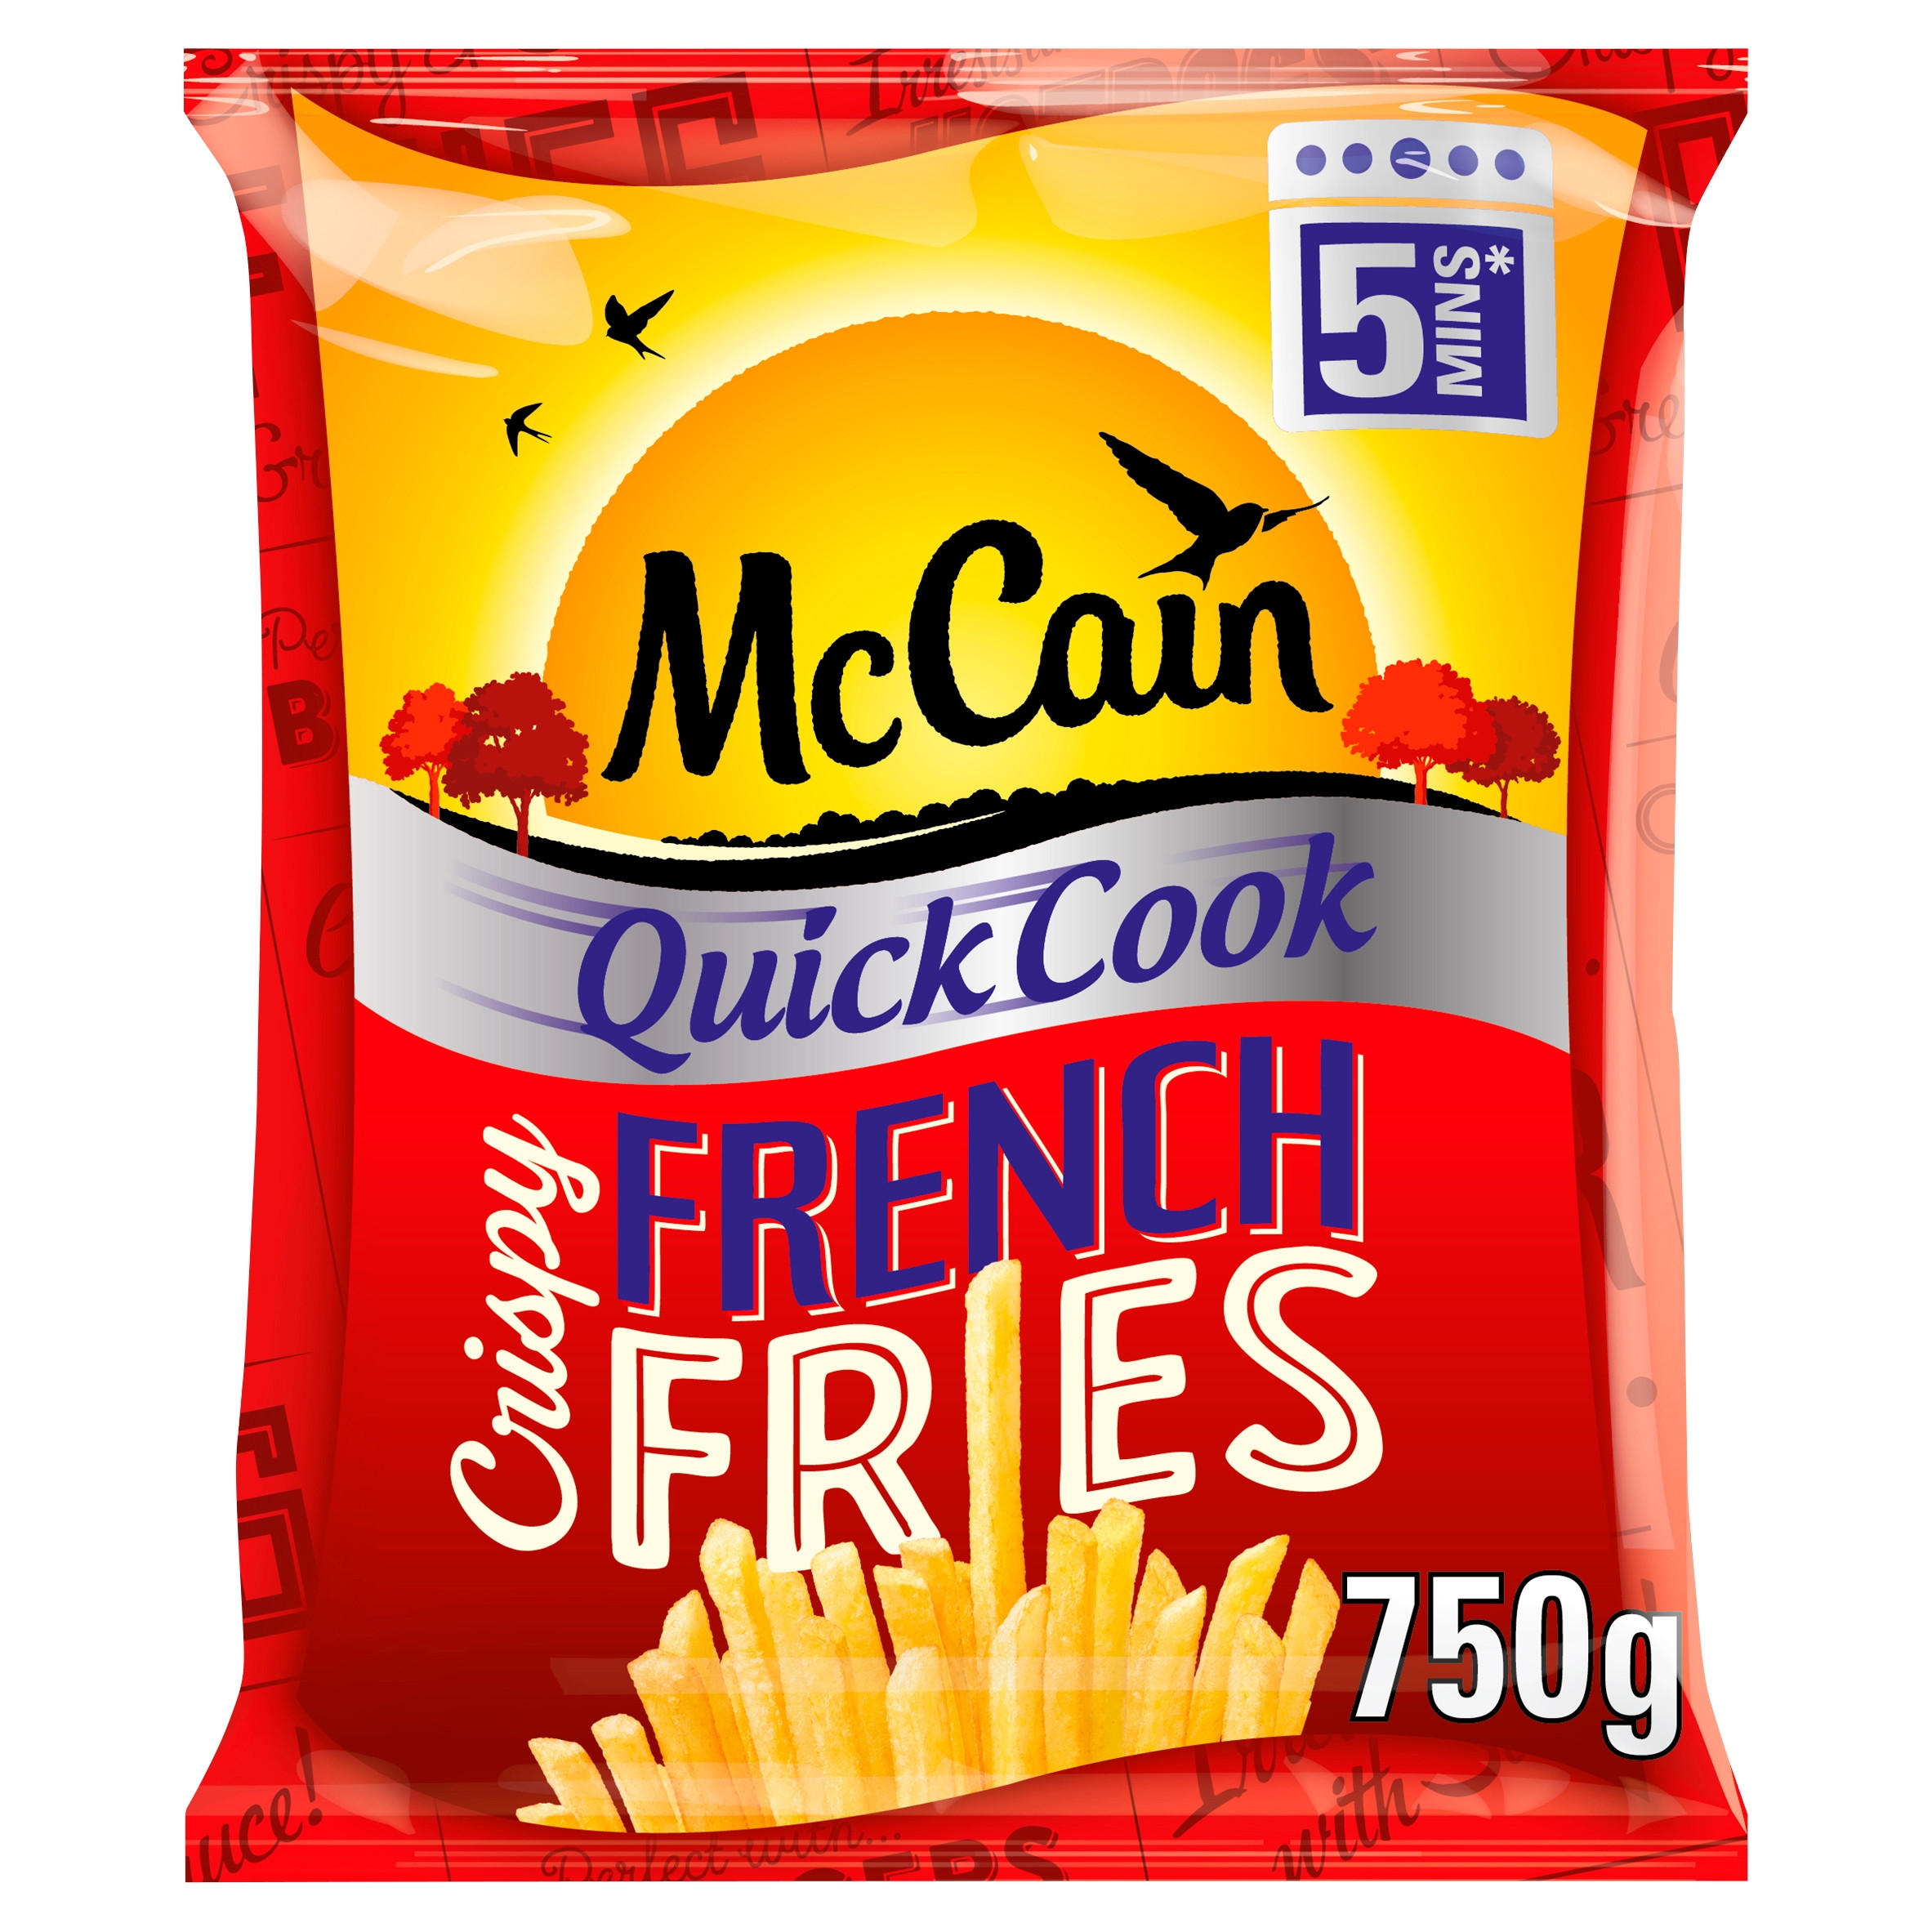 McCain Quick Cook Crispy French Fries 750g Chips & Fries Iceland Foods